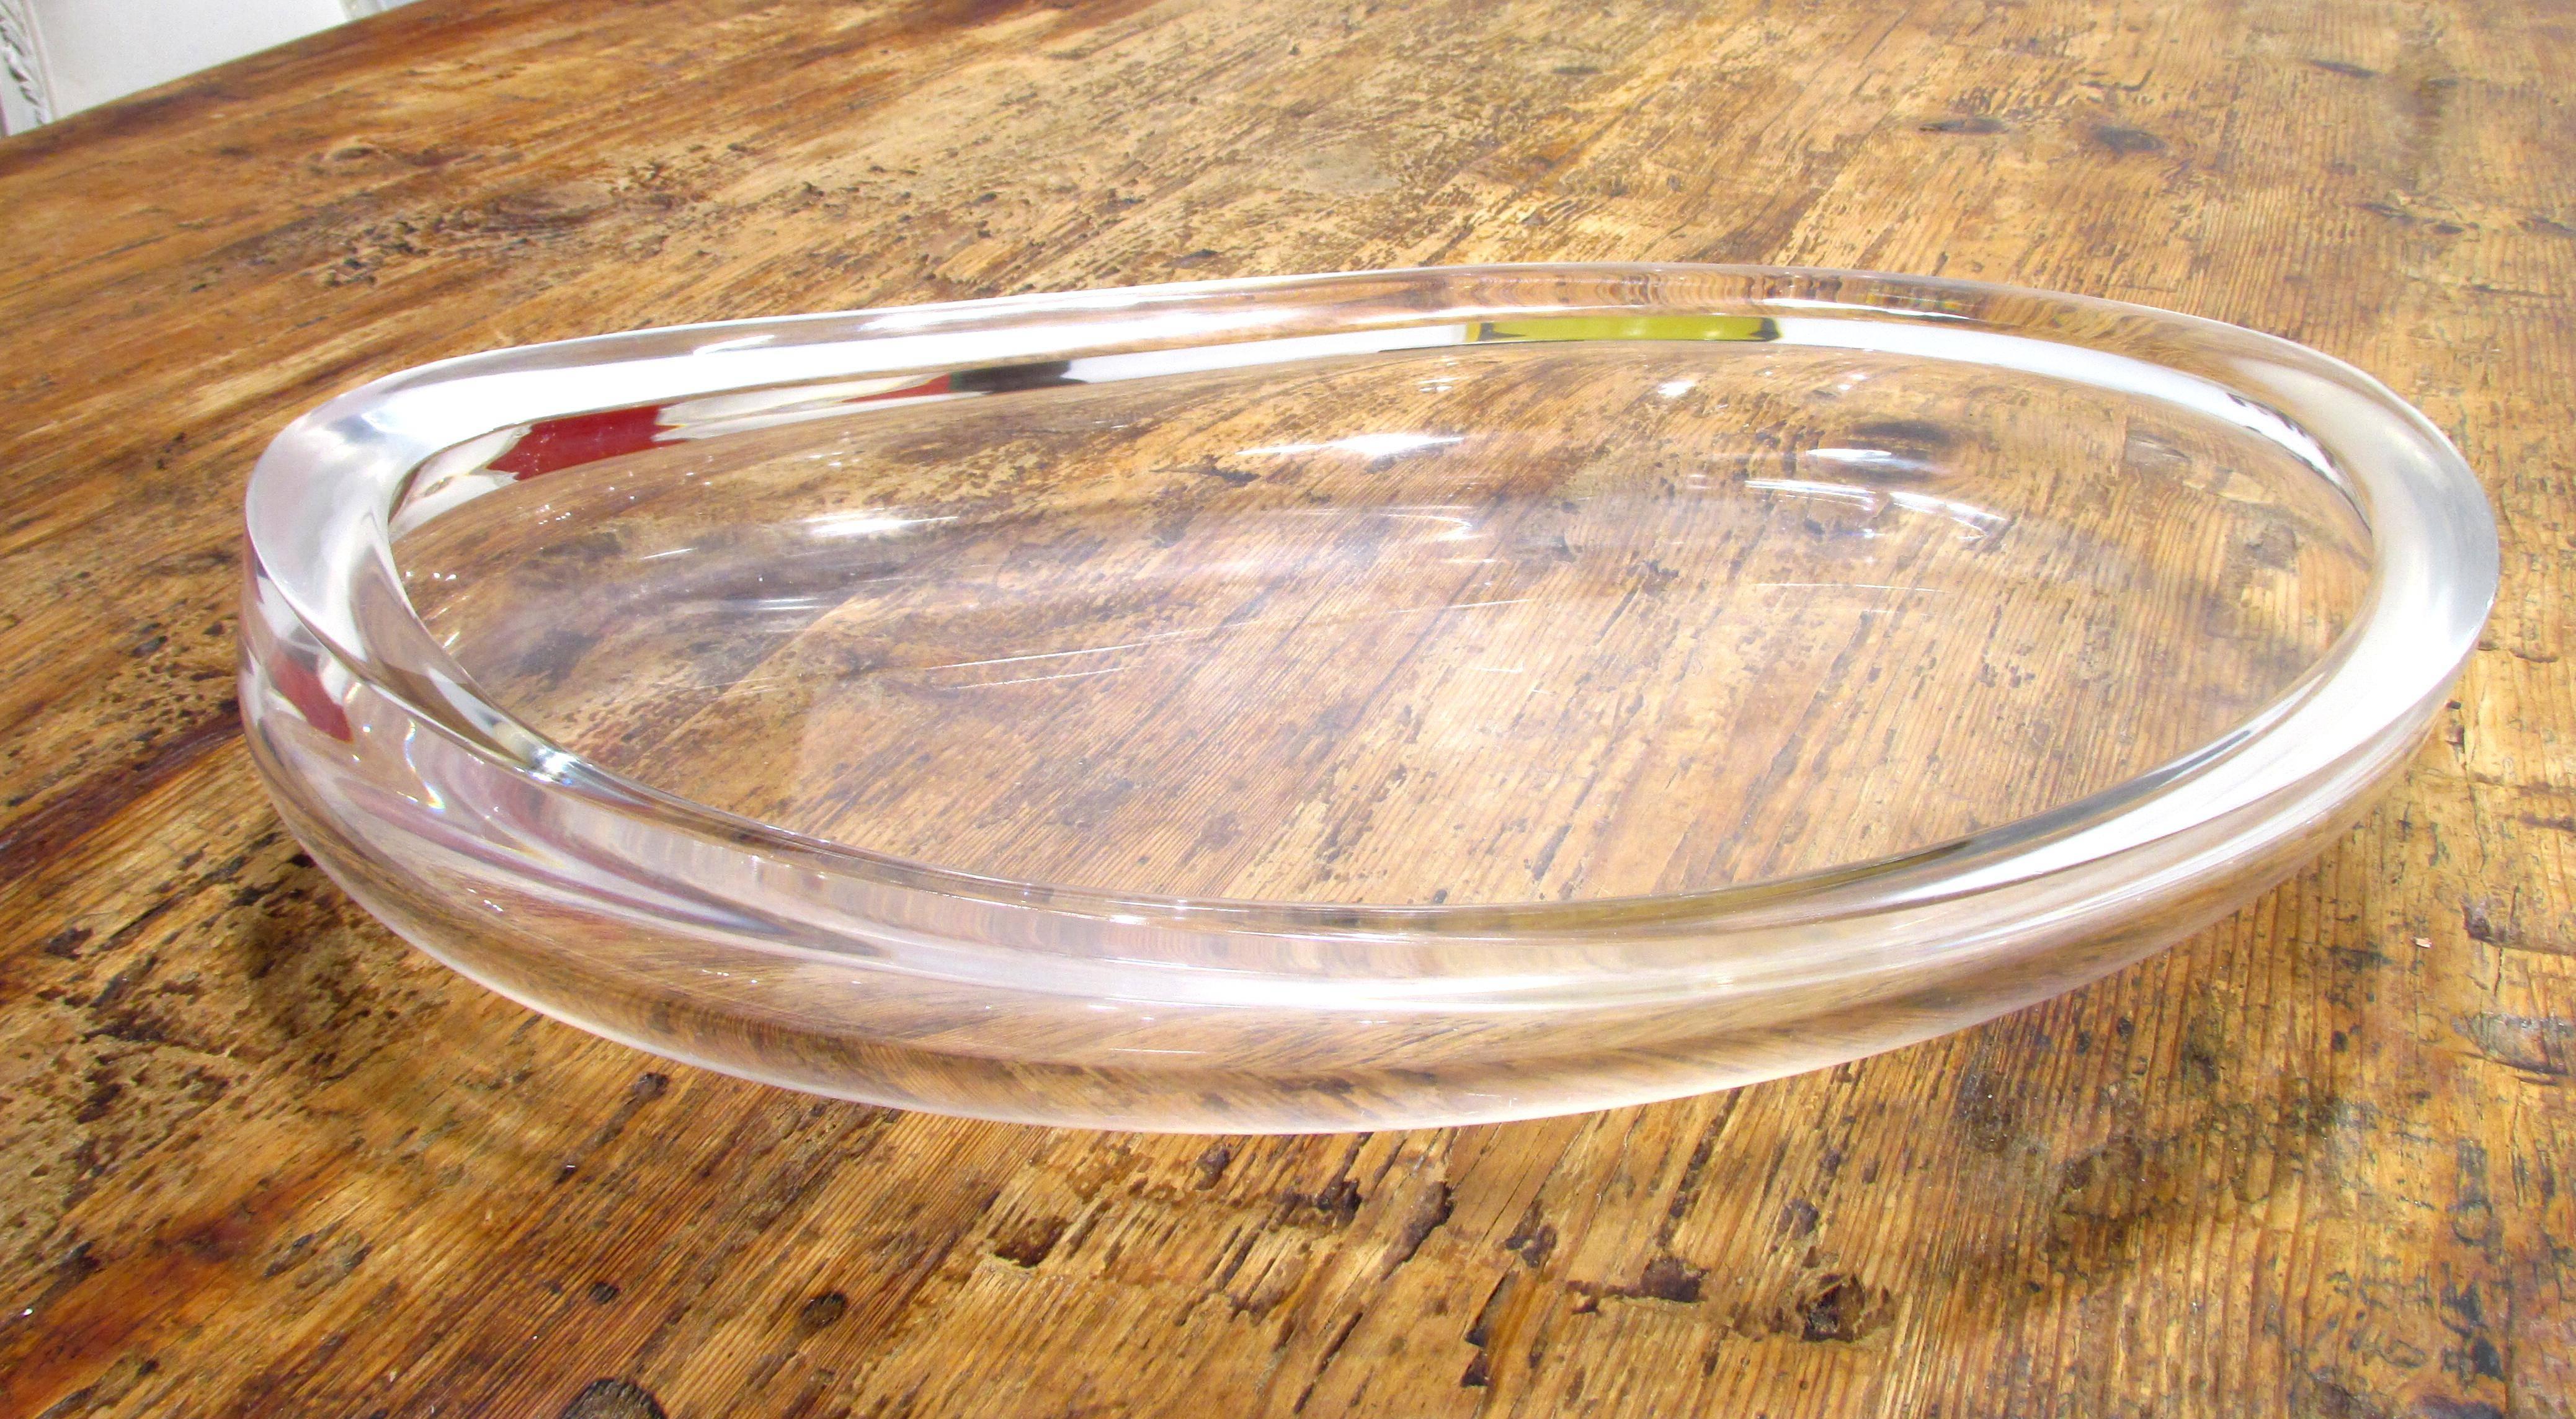 Large thick Lucite bowl in oval shape.